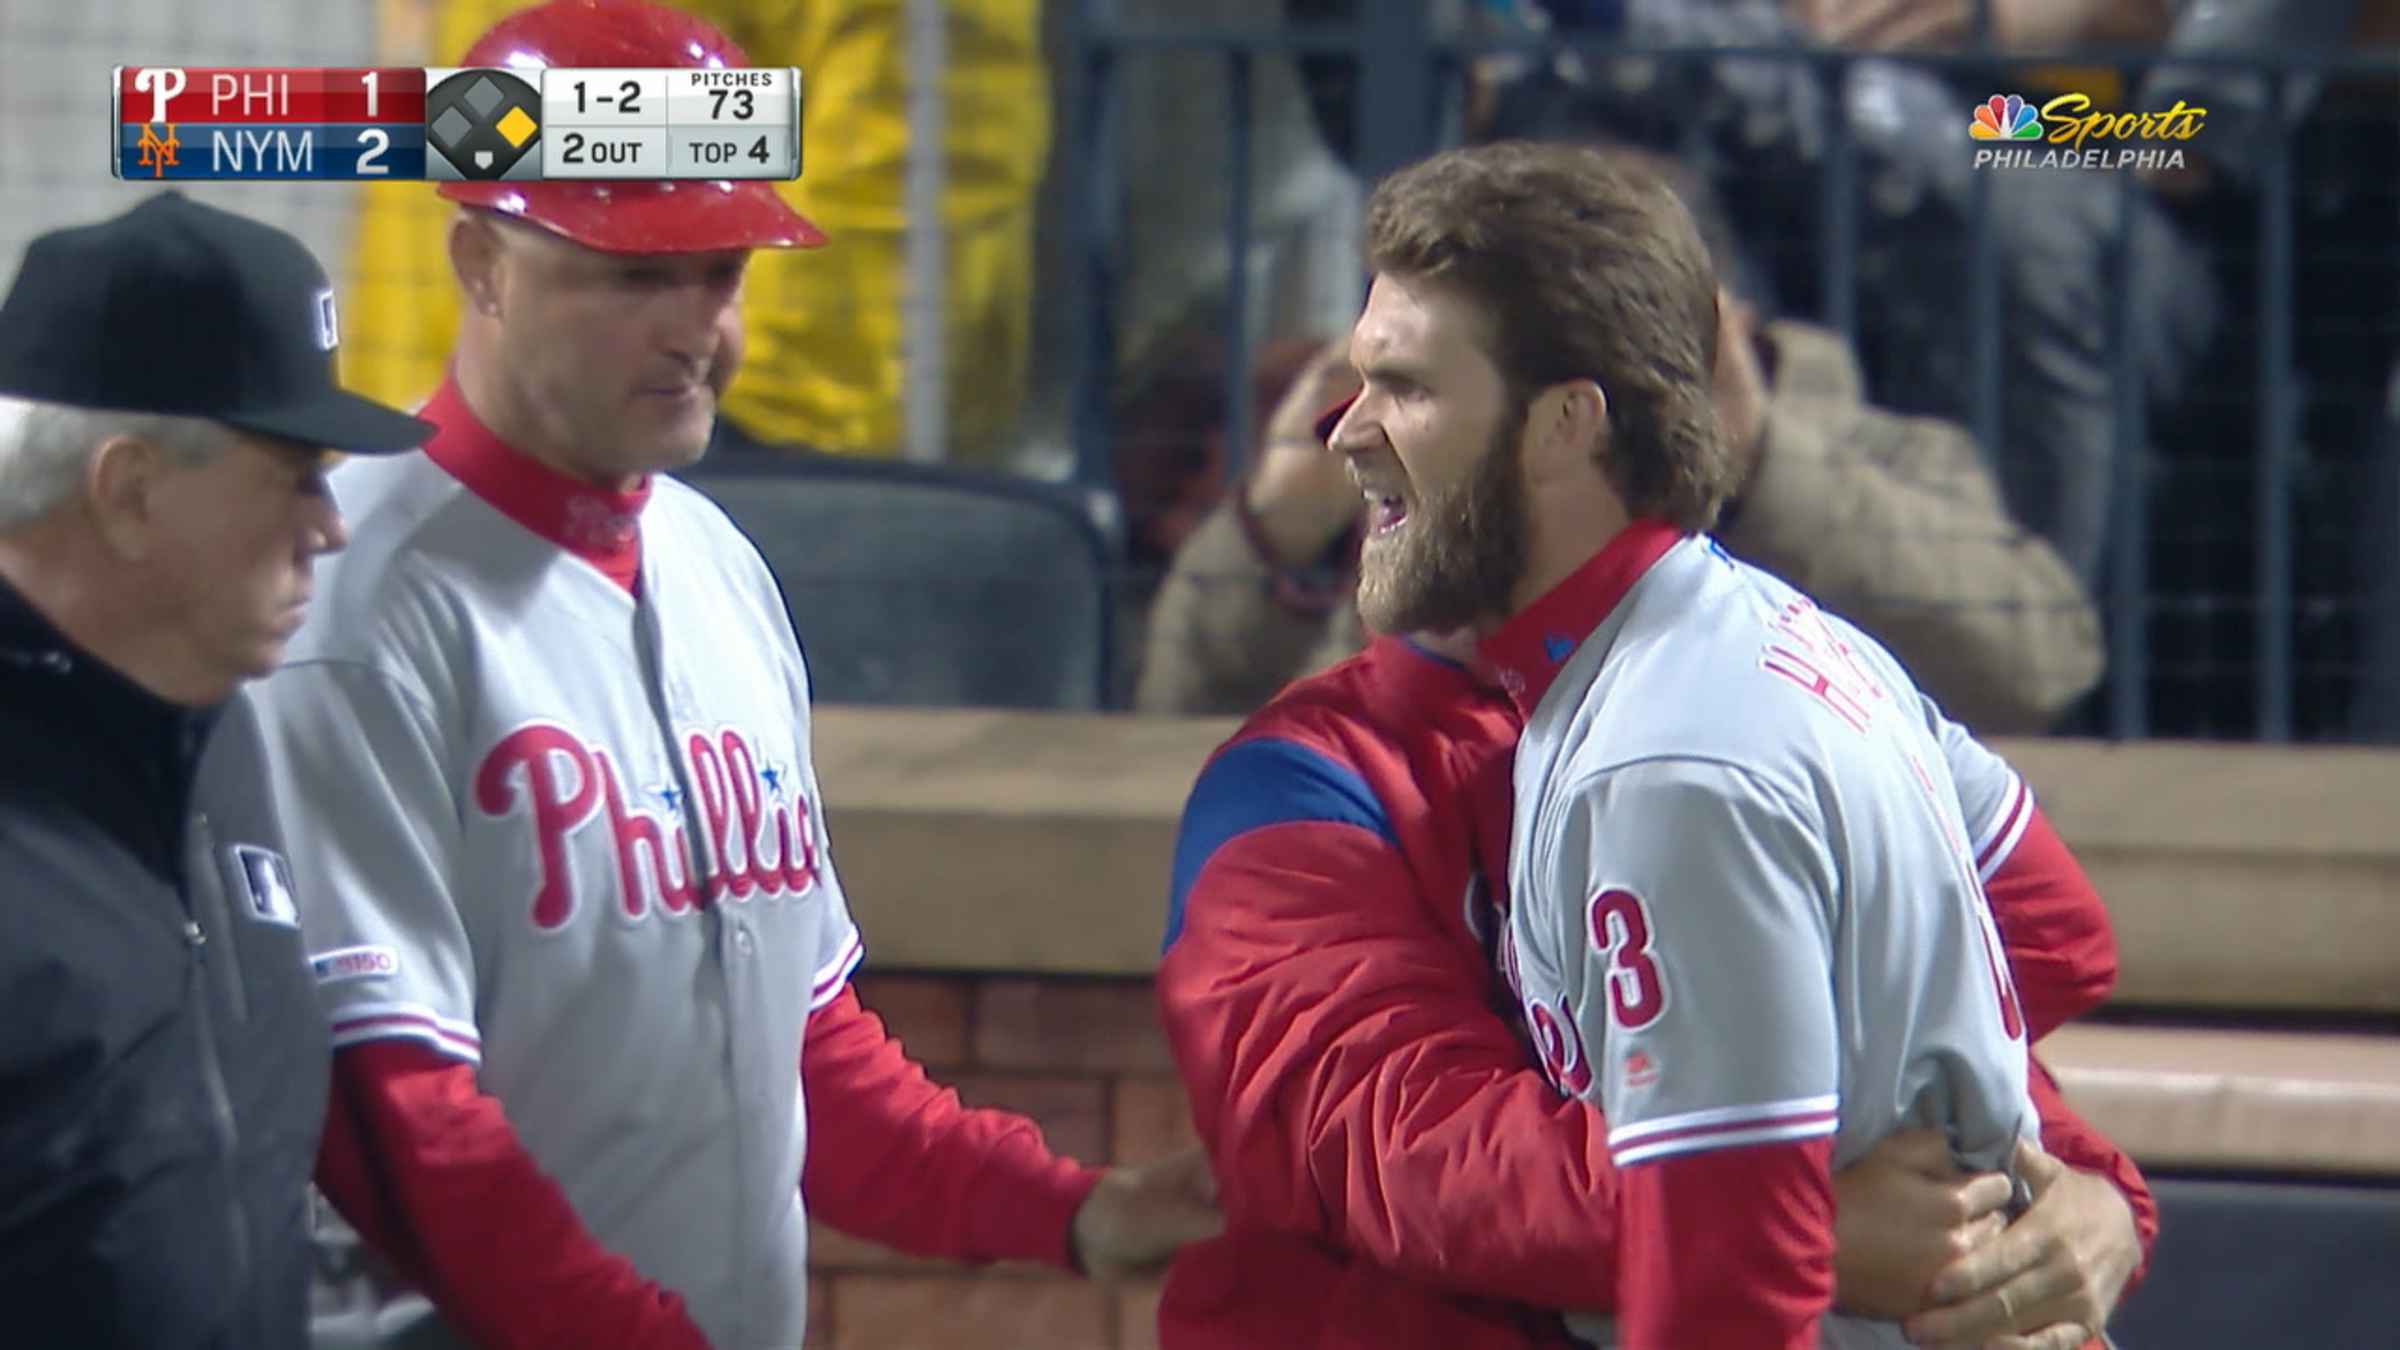 Bryce Harper speaks out after ejection following mass brawl during